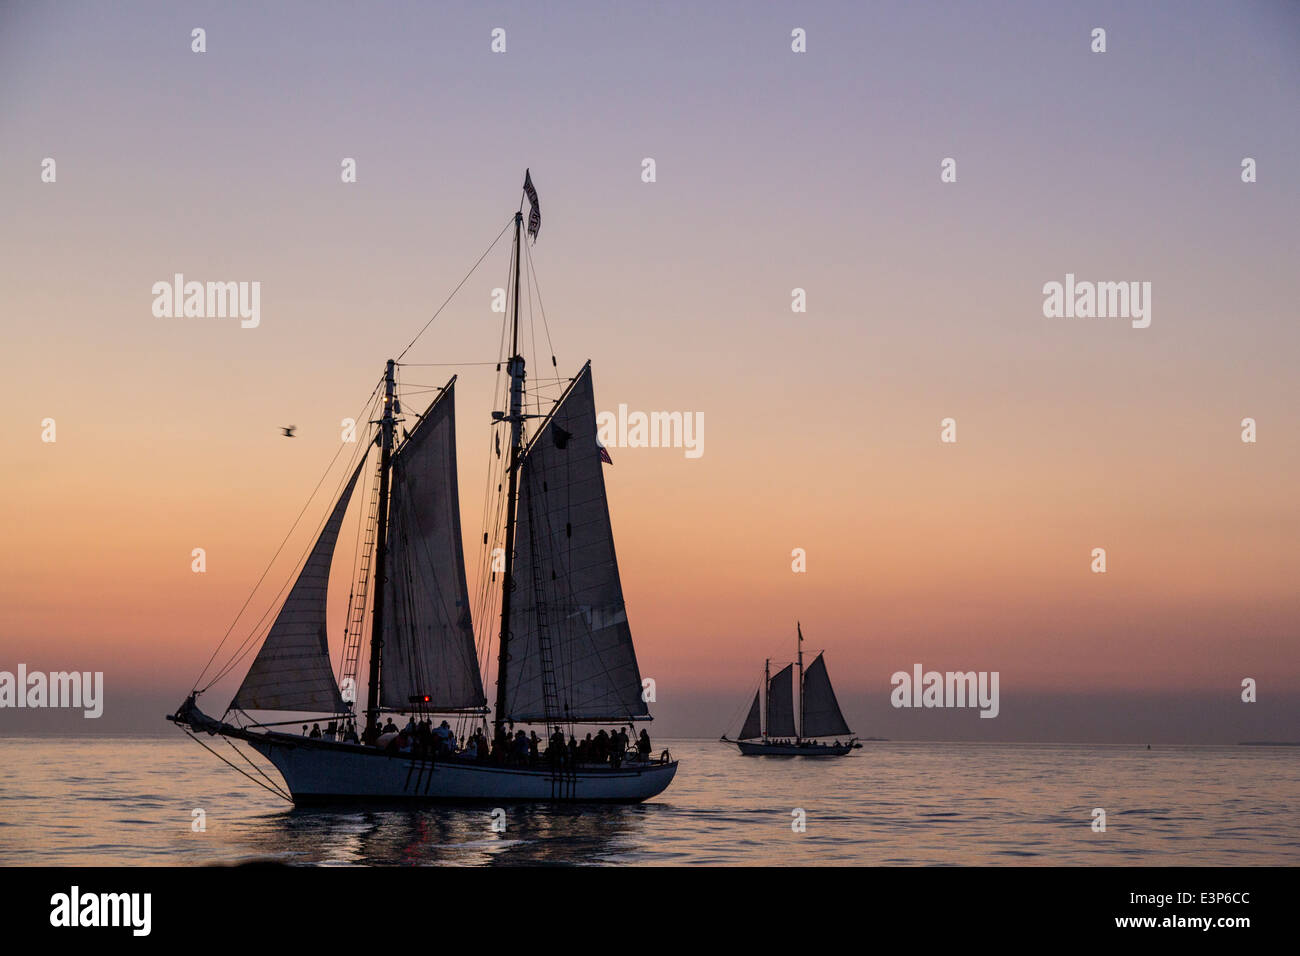 Western Union Schooner - All You Need to Know BEFORE You Go (with Photos)